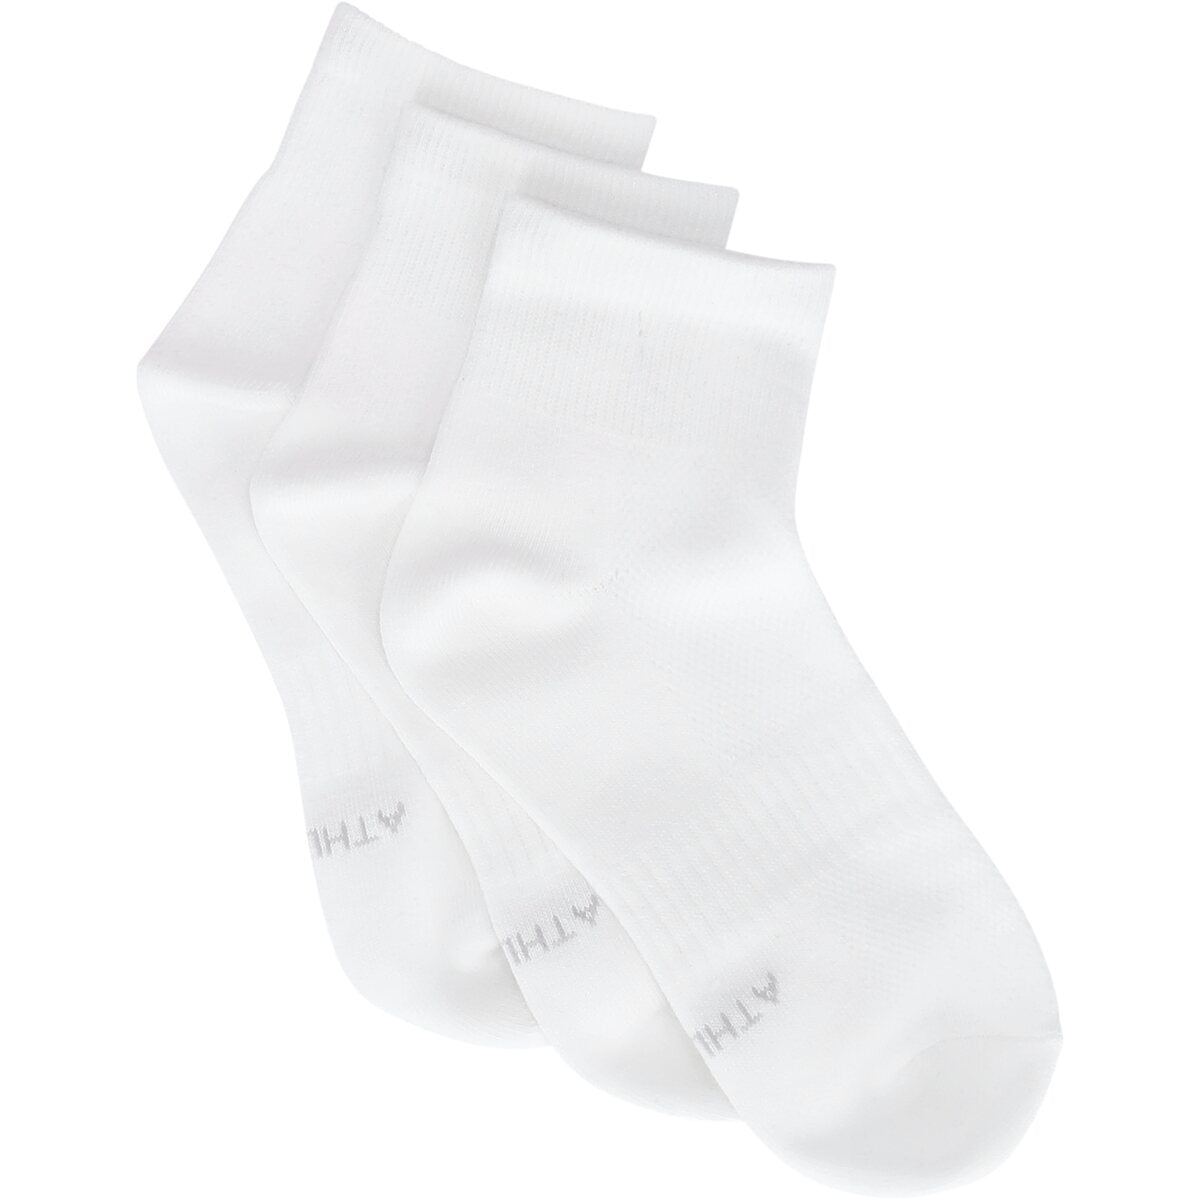 Athlecia Comfort-Mesh Sustainable Quarter Cut Sock 3-Pack - White 2 Shaws Department Stores